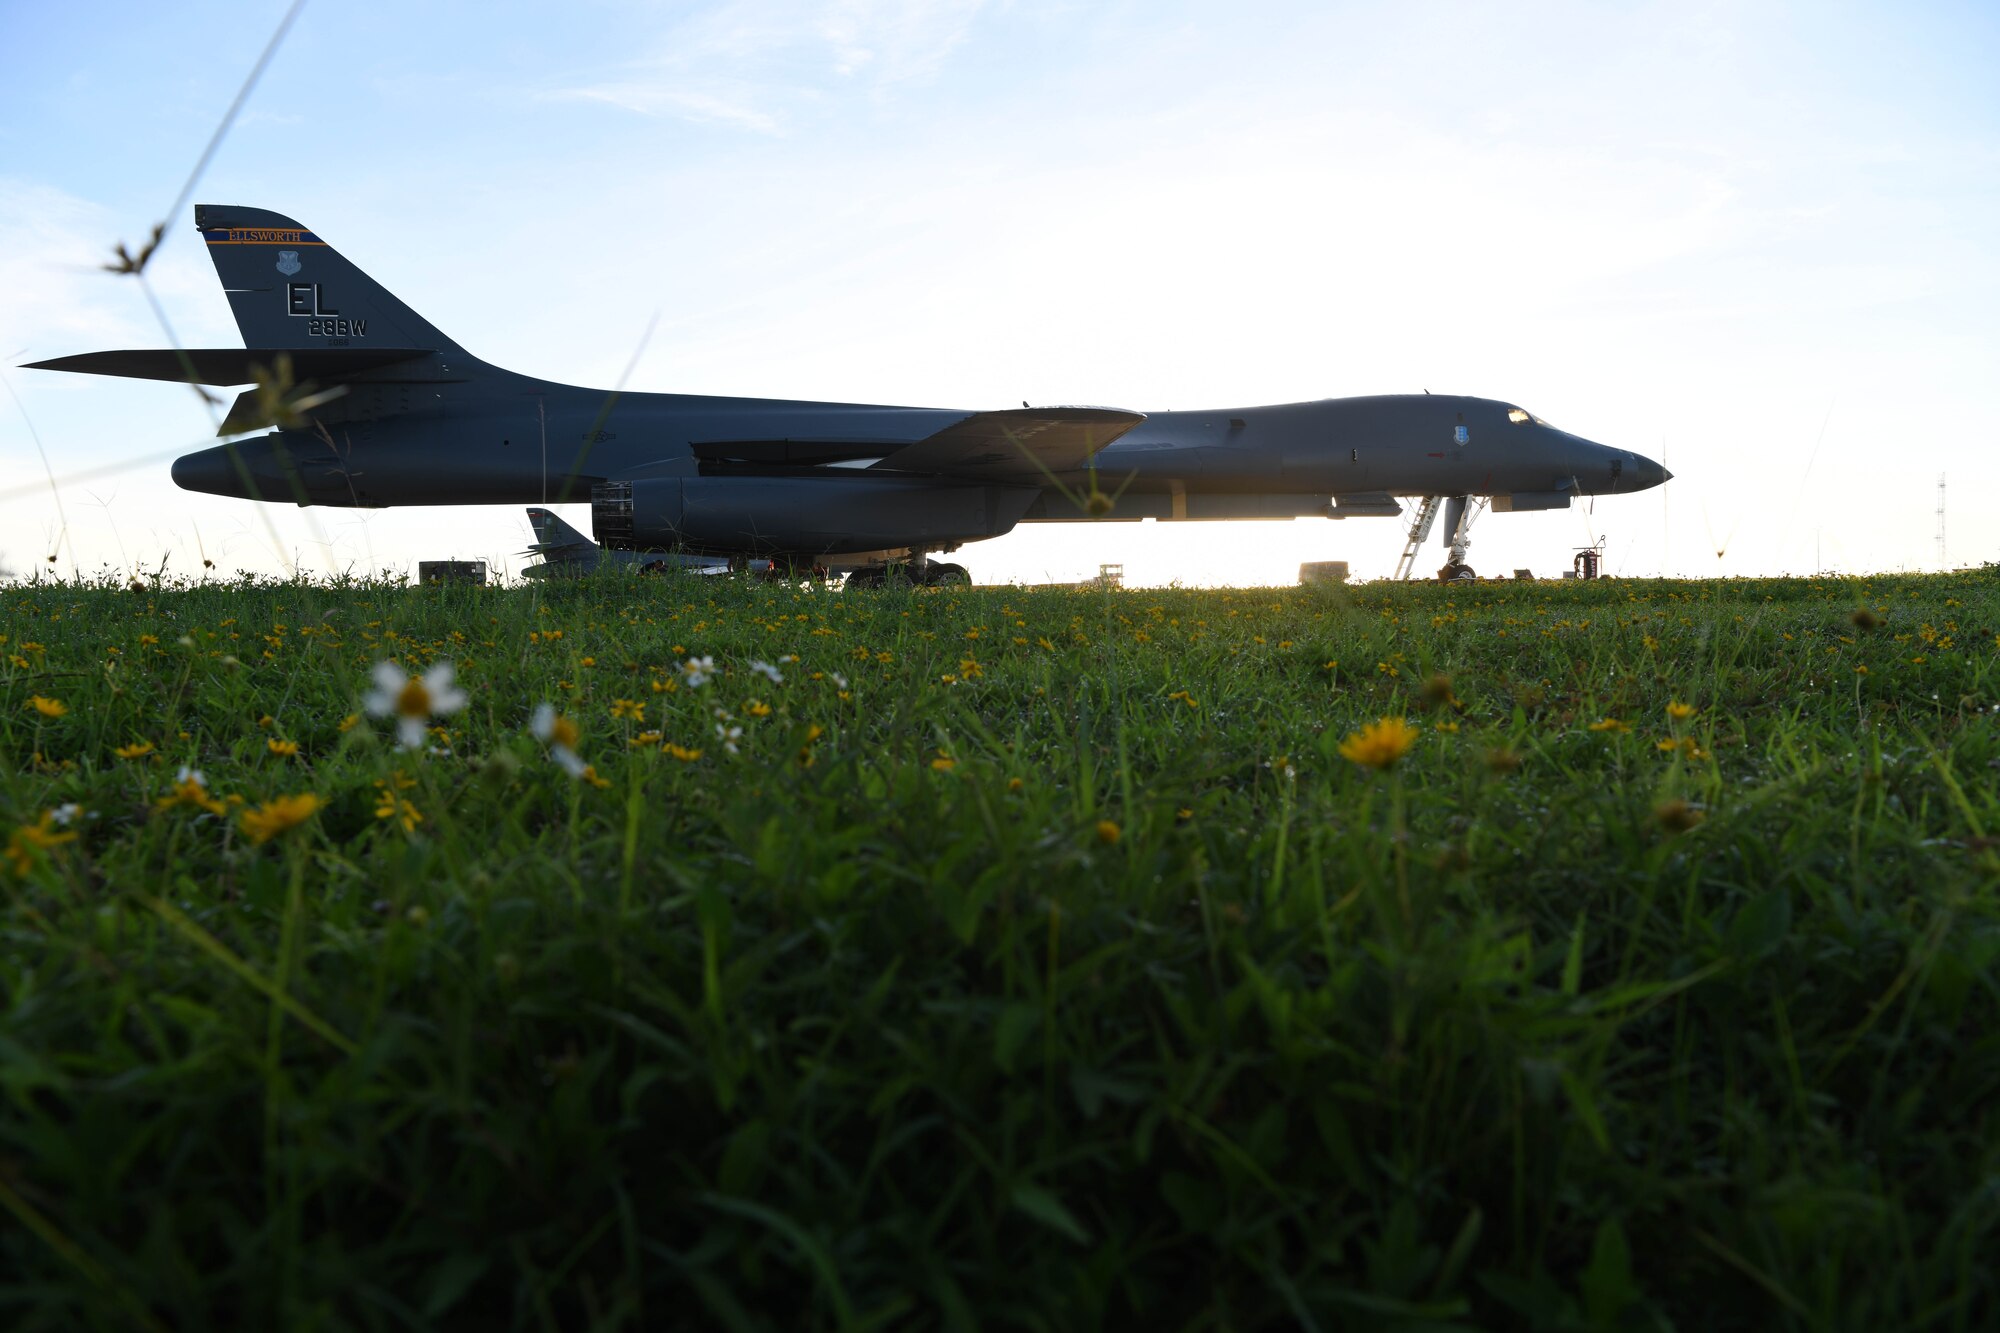 A B-1B Lancer assigned to the 28th Bomb Wing, Ellsworth Air Force Base, S.D., sits on the flightline at Andersen AFB, Guam, Sept. 23, 2020. The U.S. military frequently conducts joint training to refine operational proficiency, improve contingency response abilities and promote stability and security throughout the Indo-Pacific region.  (U.S. Air Force photo by Staff Sgt. Nicolas Z. Erwin)